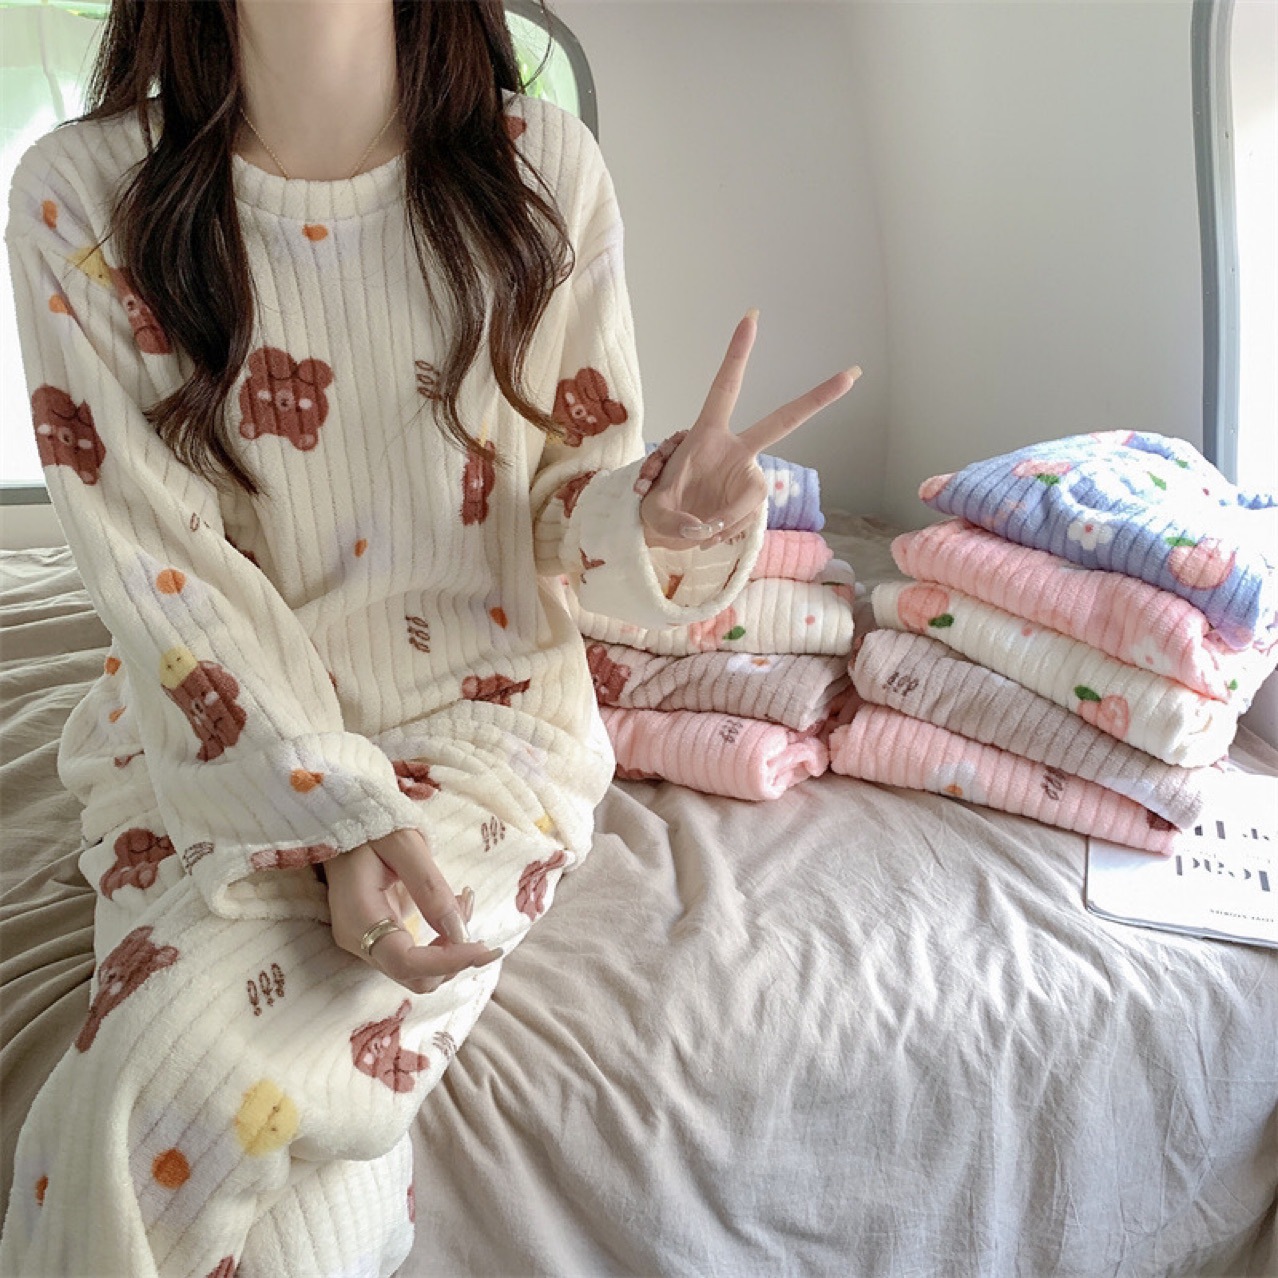  Women's Pajamas, Warm, Convenient Clothes, Nap Wear, Loose,  Spring, Autumn, Winter, Soft, Warm, Washing, Front Opening, Top and Bottom  Set, Thick, Fluffy, Large, Comfortable, Comfortable to the Touch,  Loungewear, Nightwear, Cold